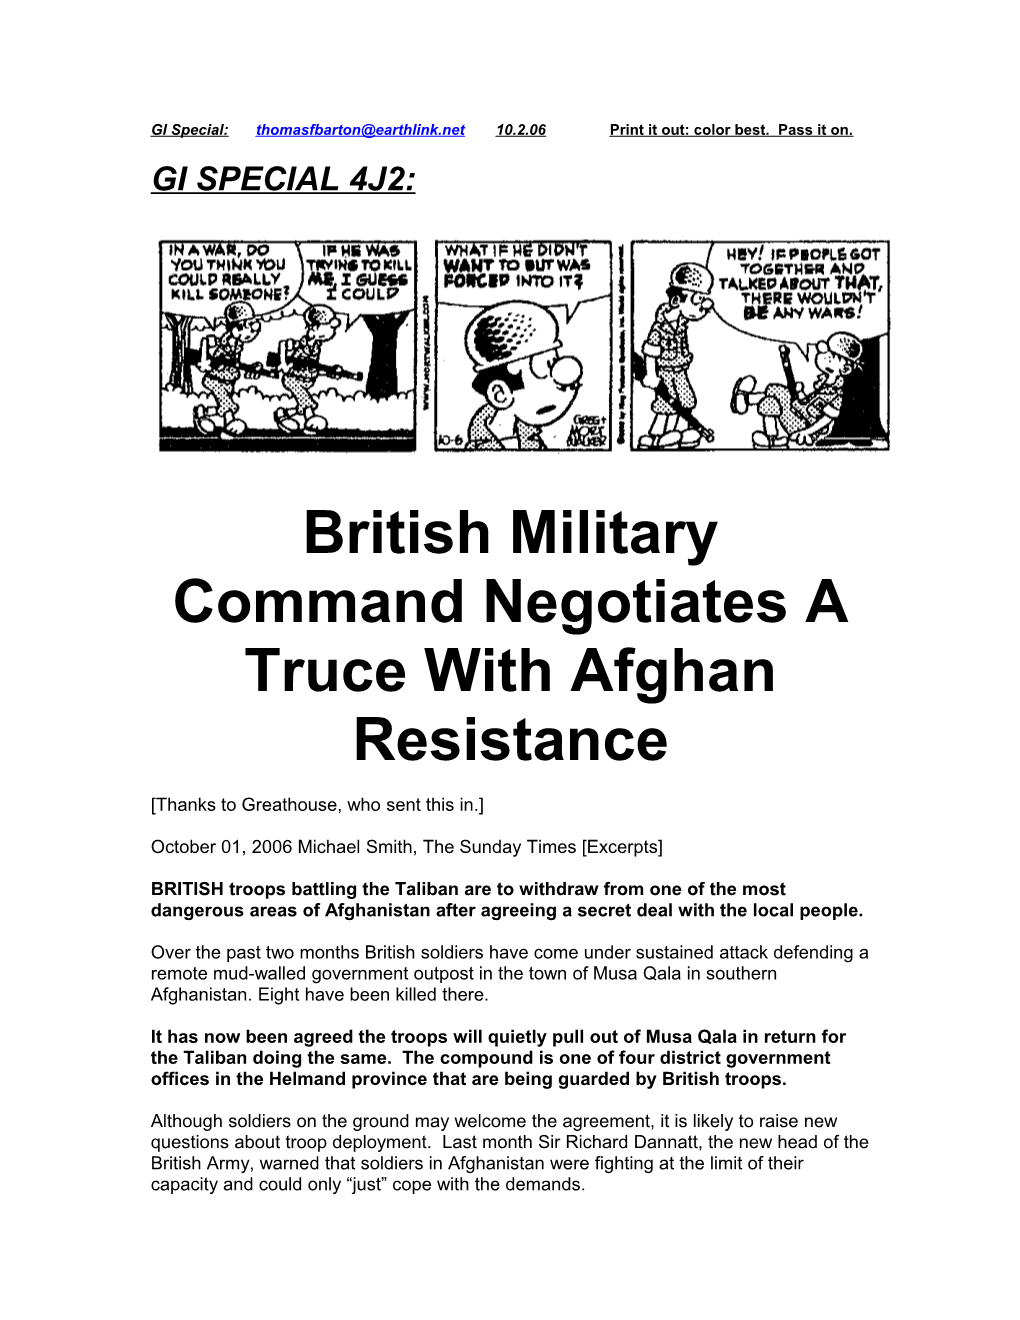 British Military Command Negotiates a Truce with Afghan Resistance